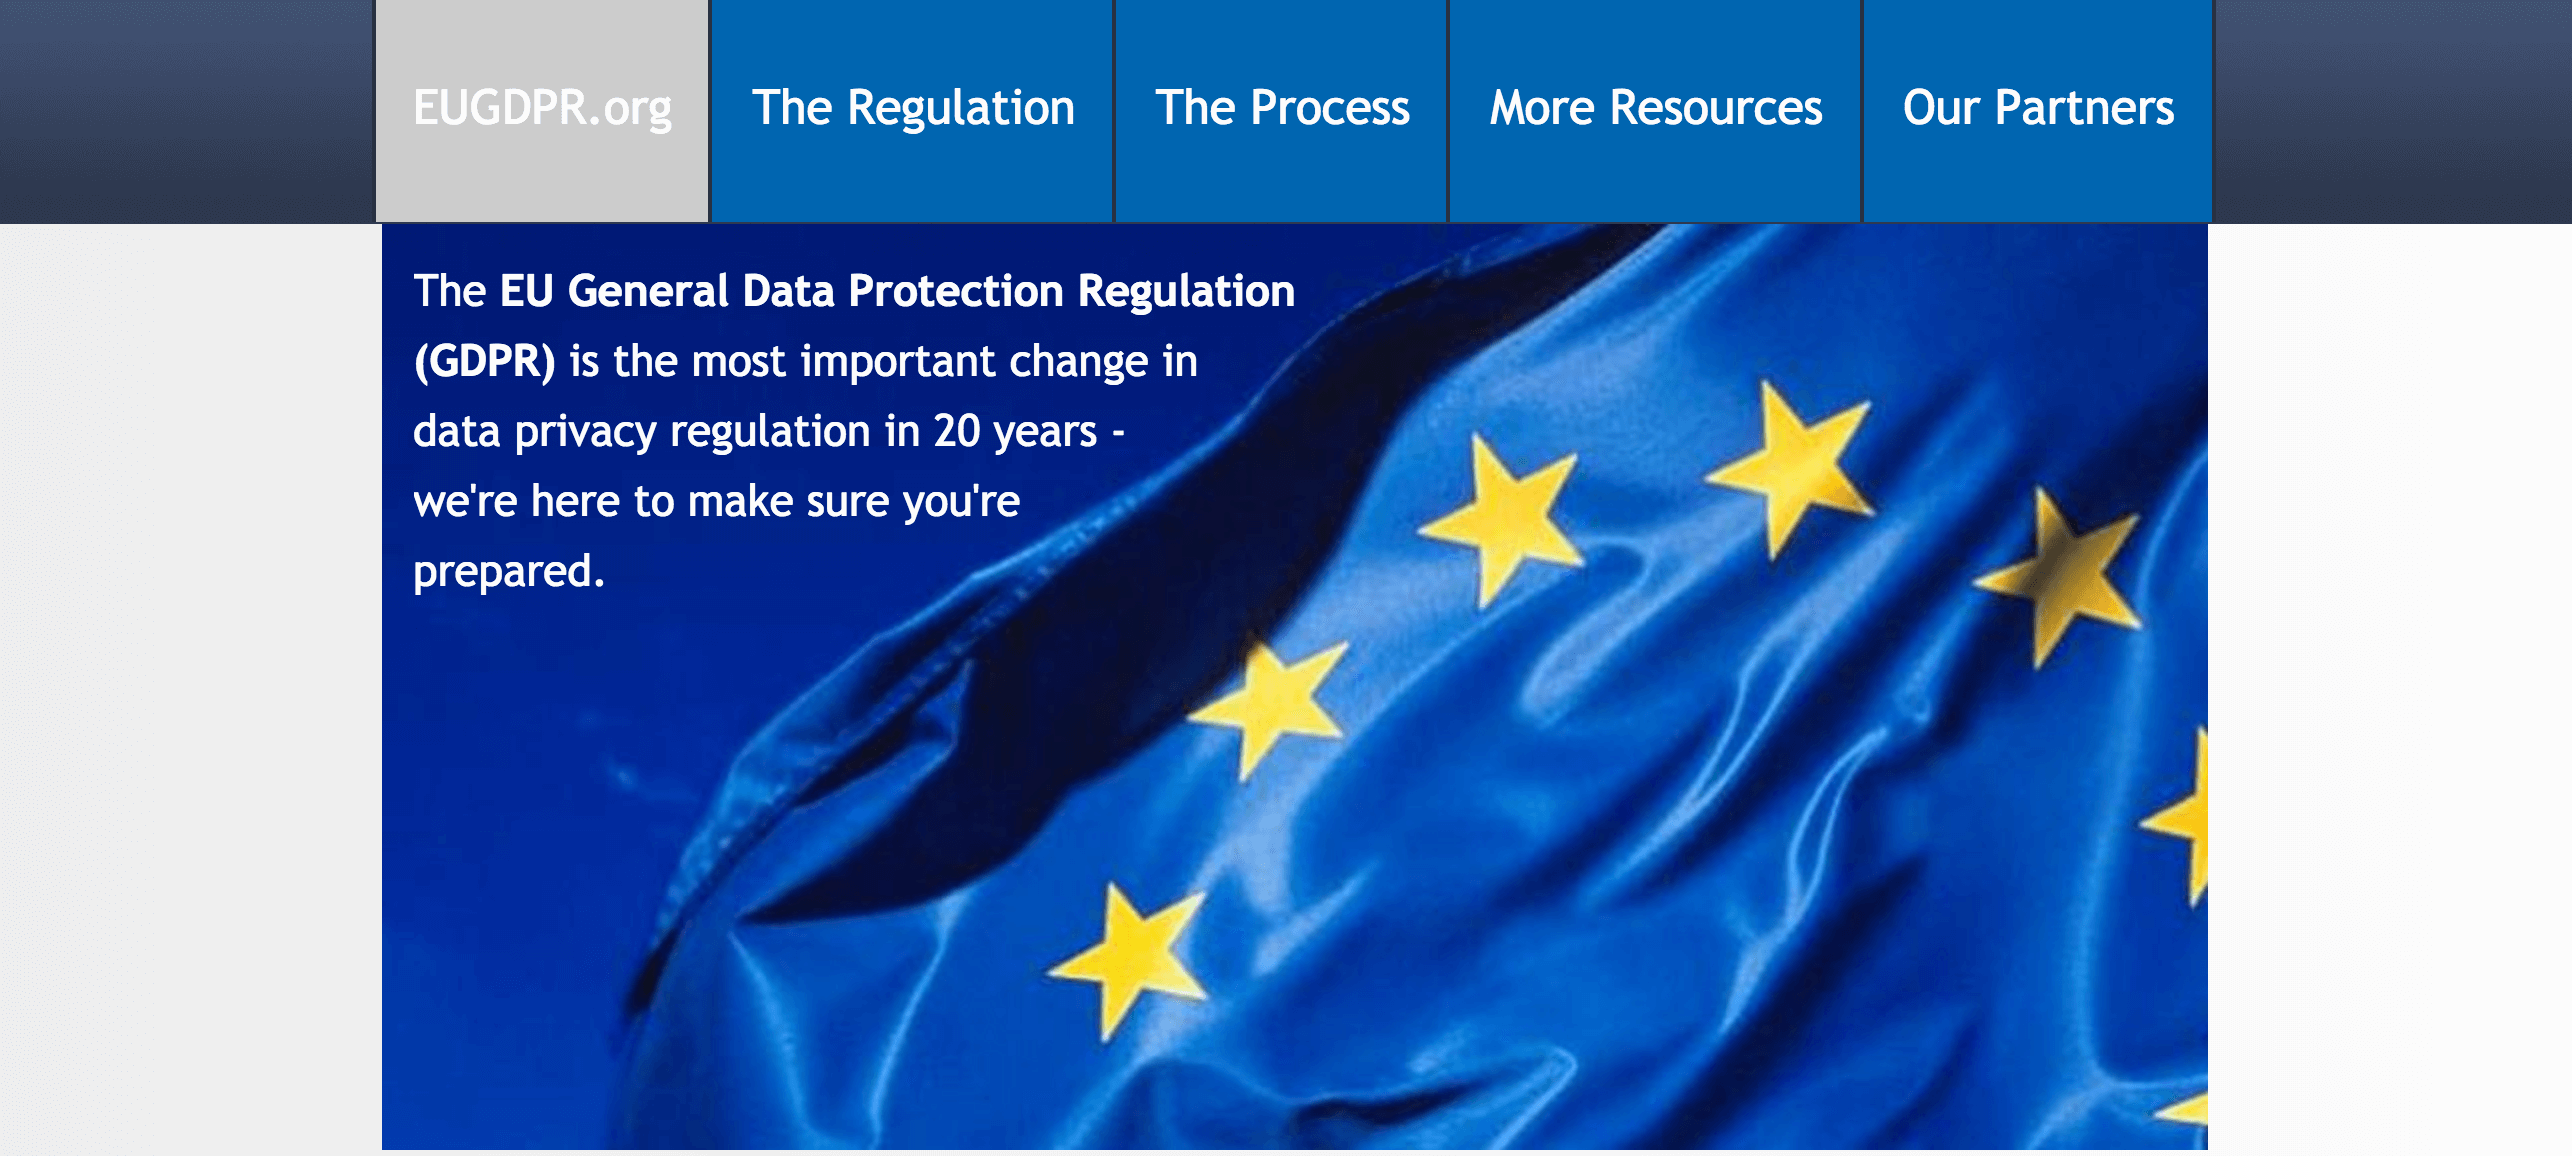 The home page for the GDPR portal.